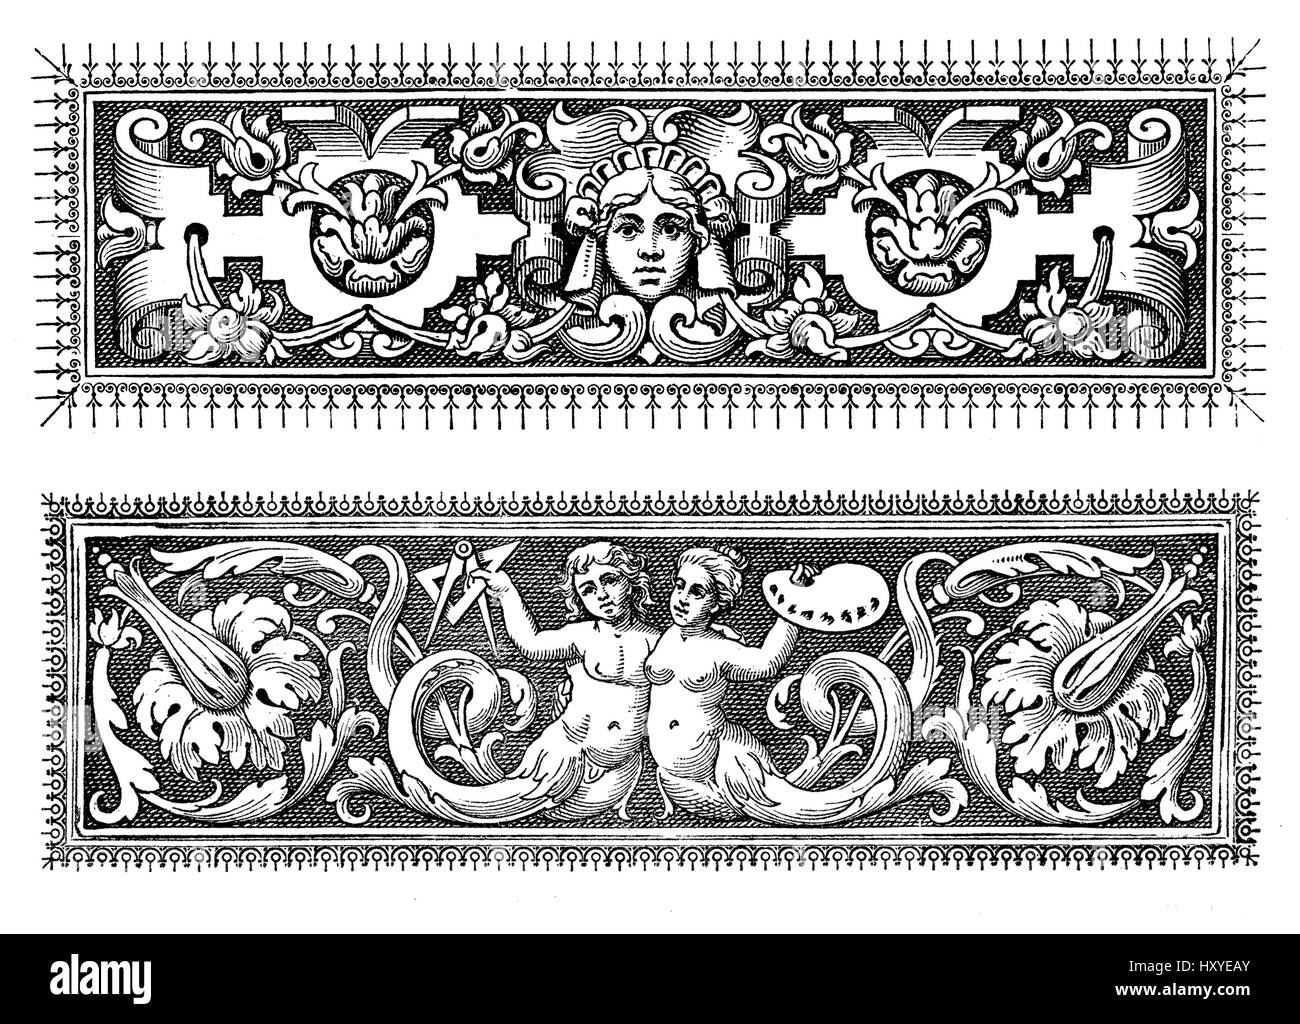 Two richly decorated baroque typographic borders with figures, objects  and floreal motives Stock Photo